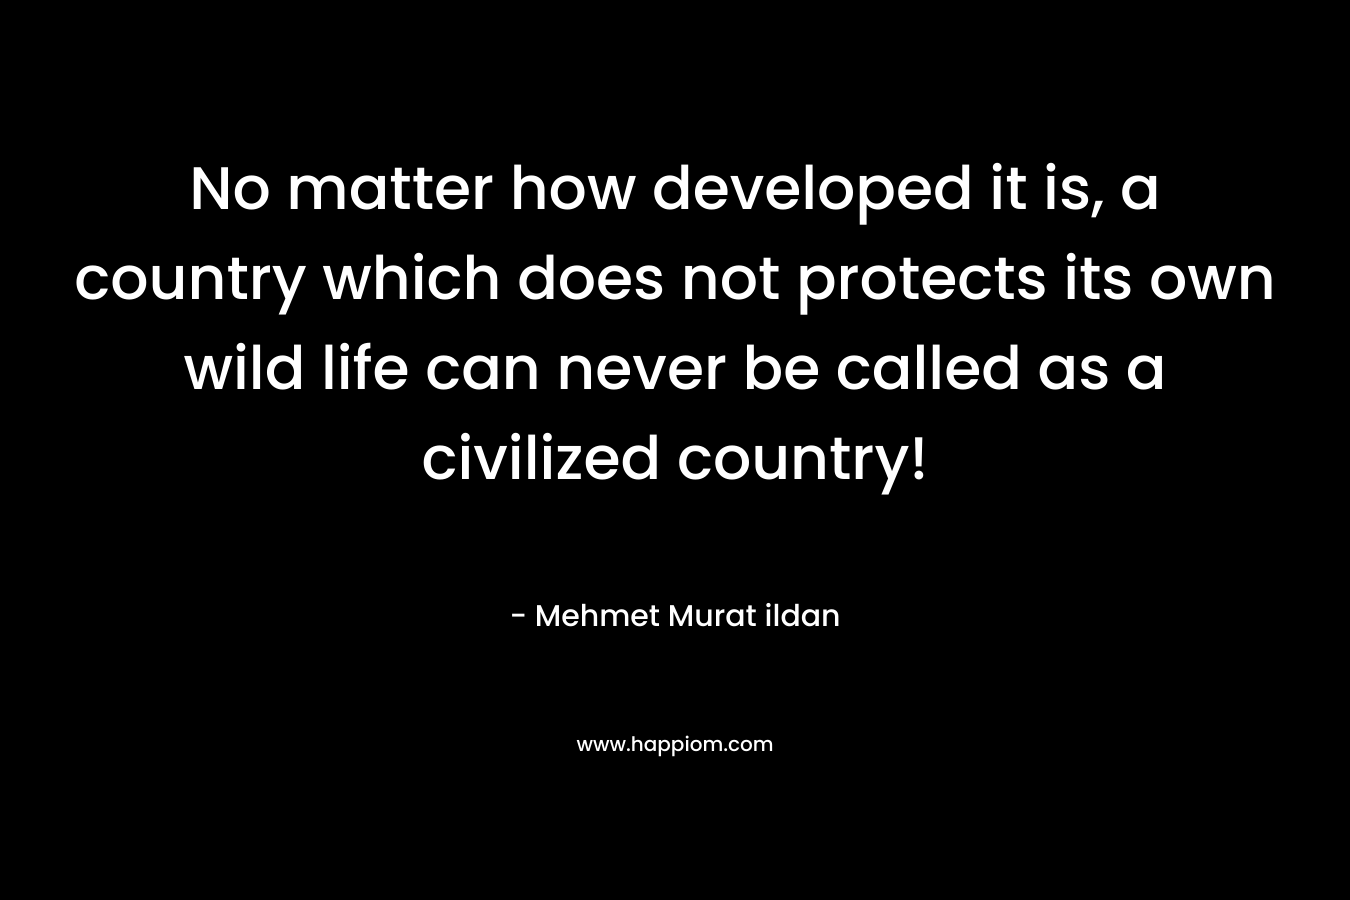 No matter how developed it is, a country which does not protects its own wild life can never be called as a civilized country! – Mehmet Murat ildan